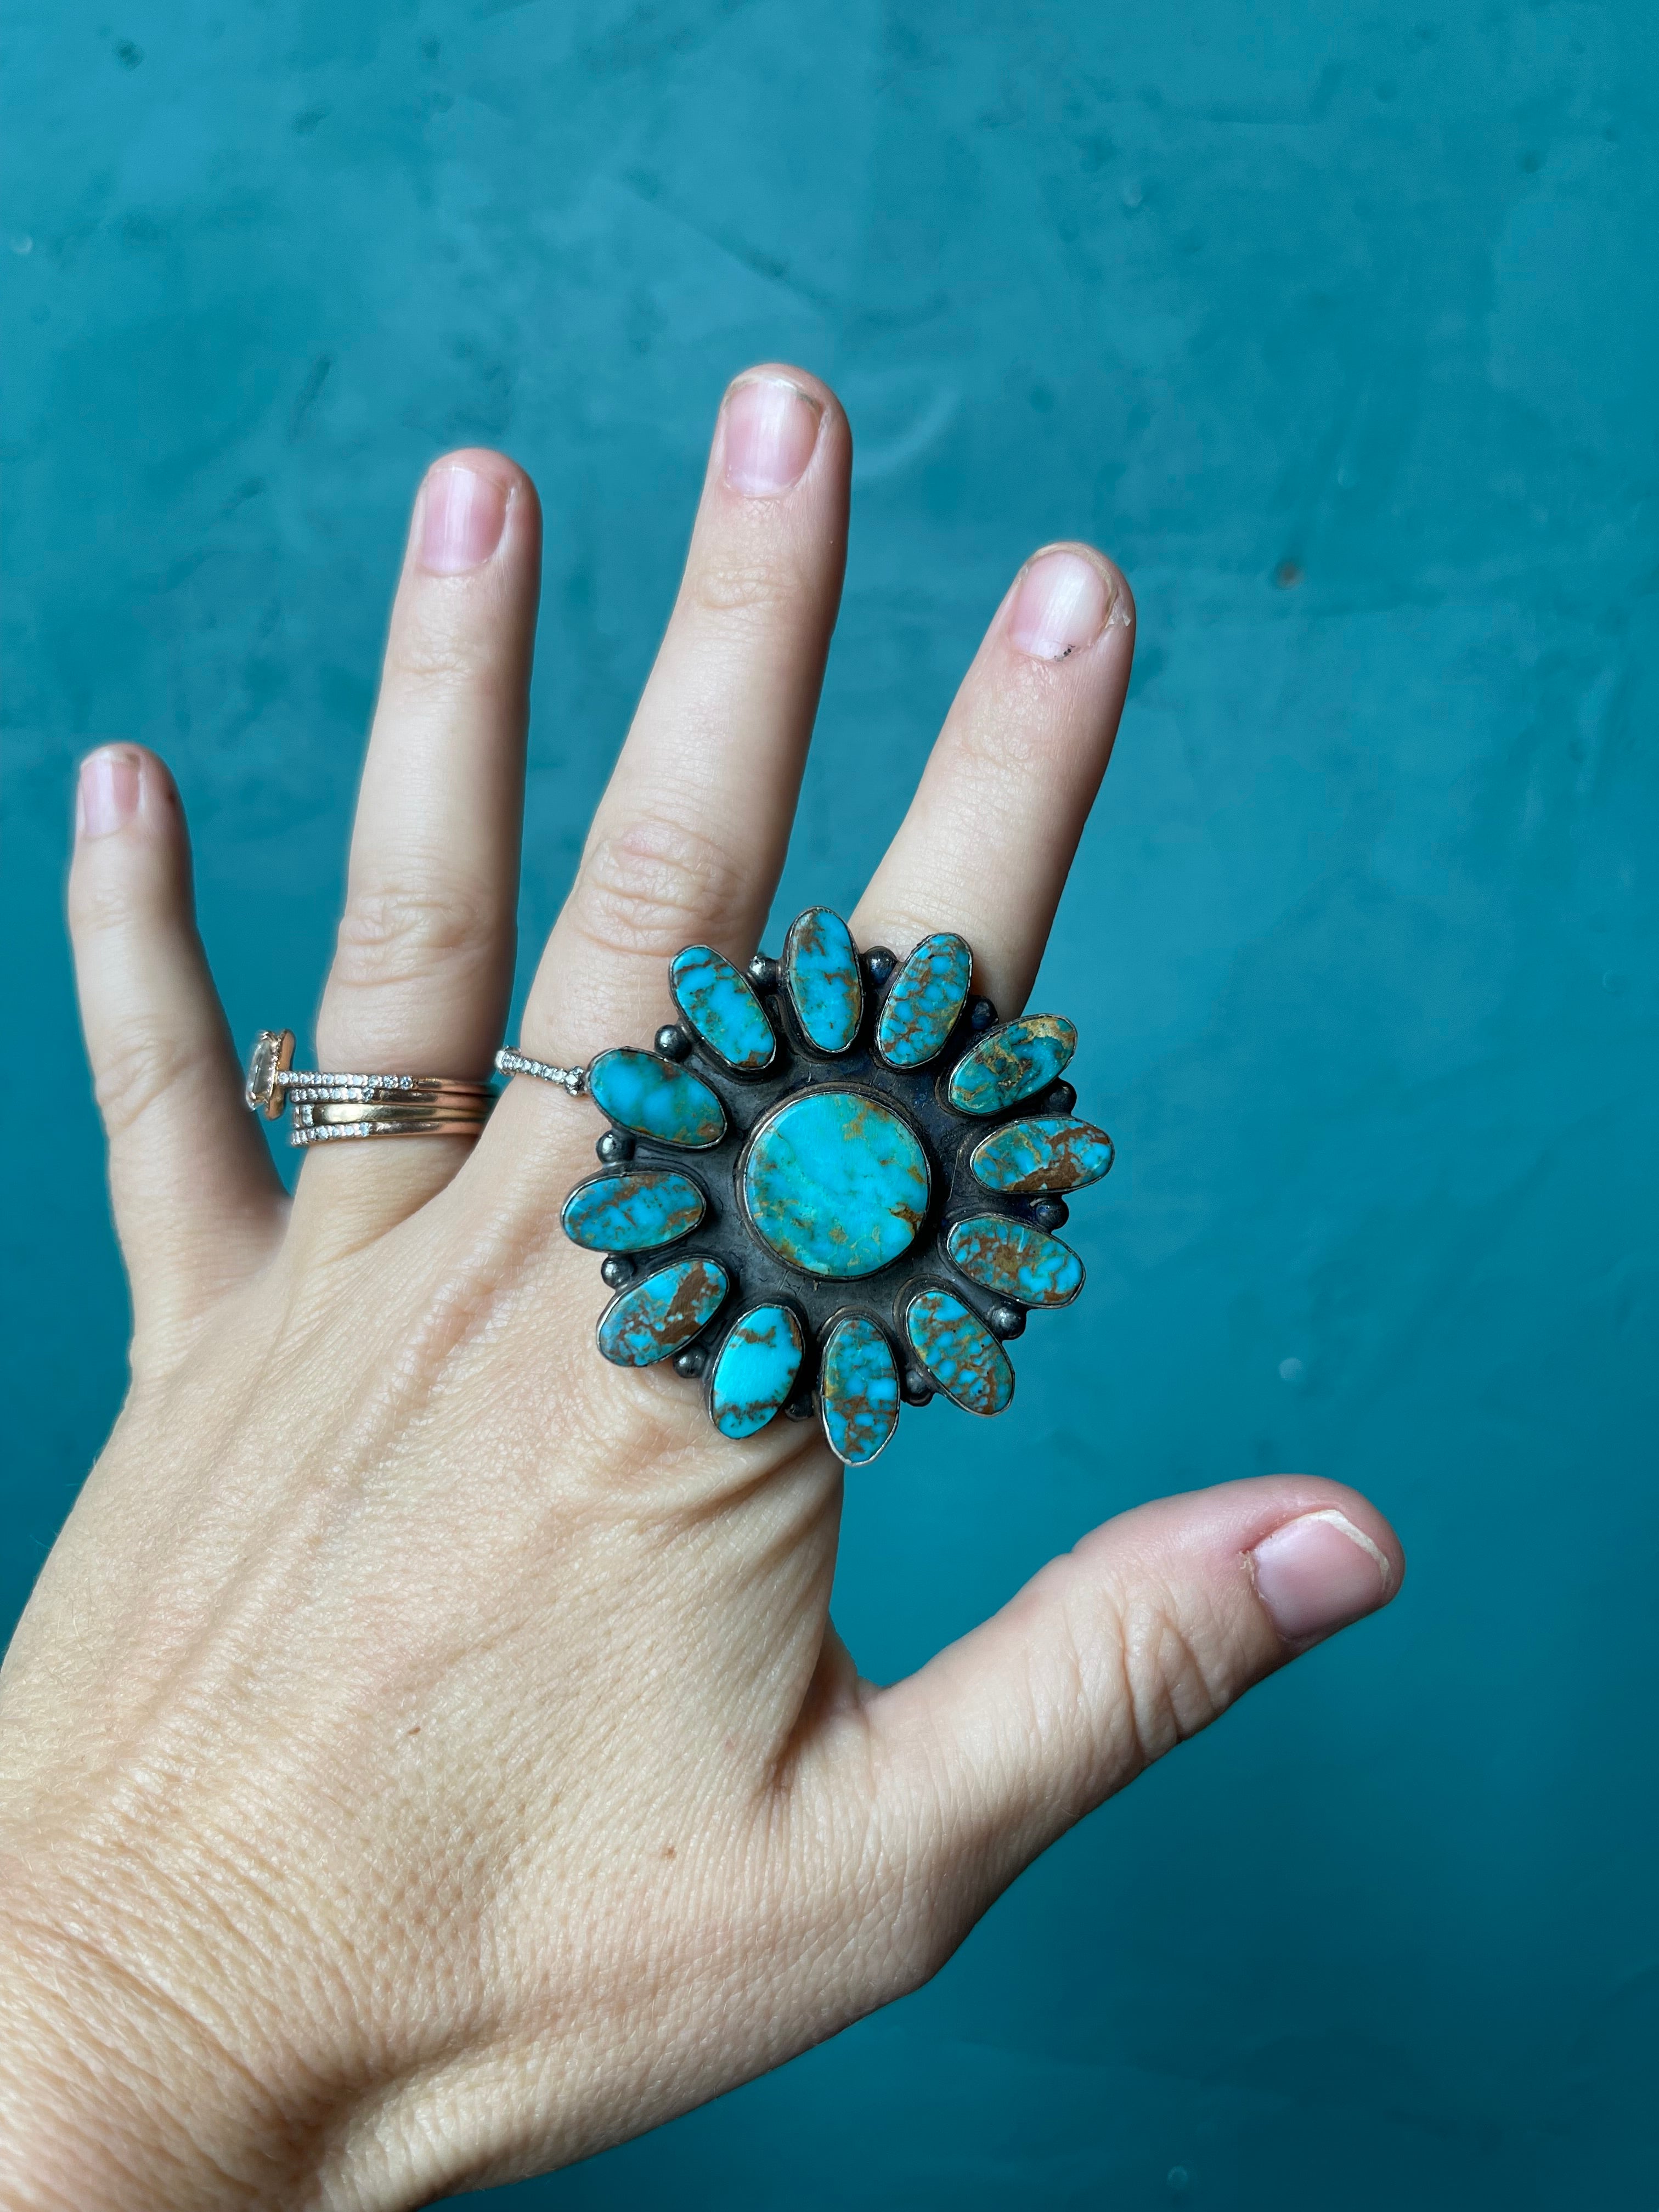 12 Turquoise Stone Flower Ring